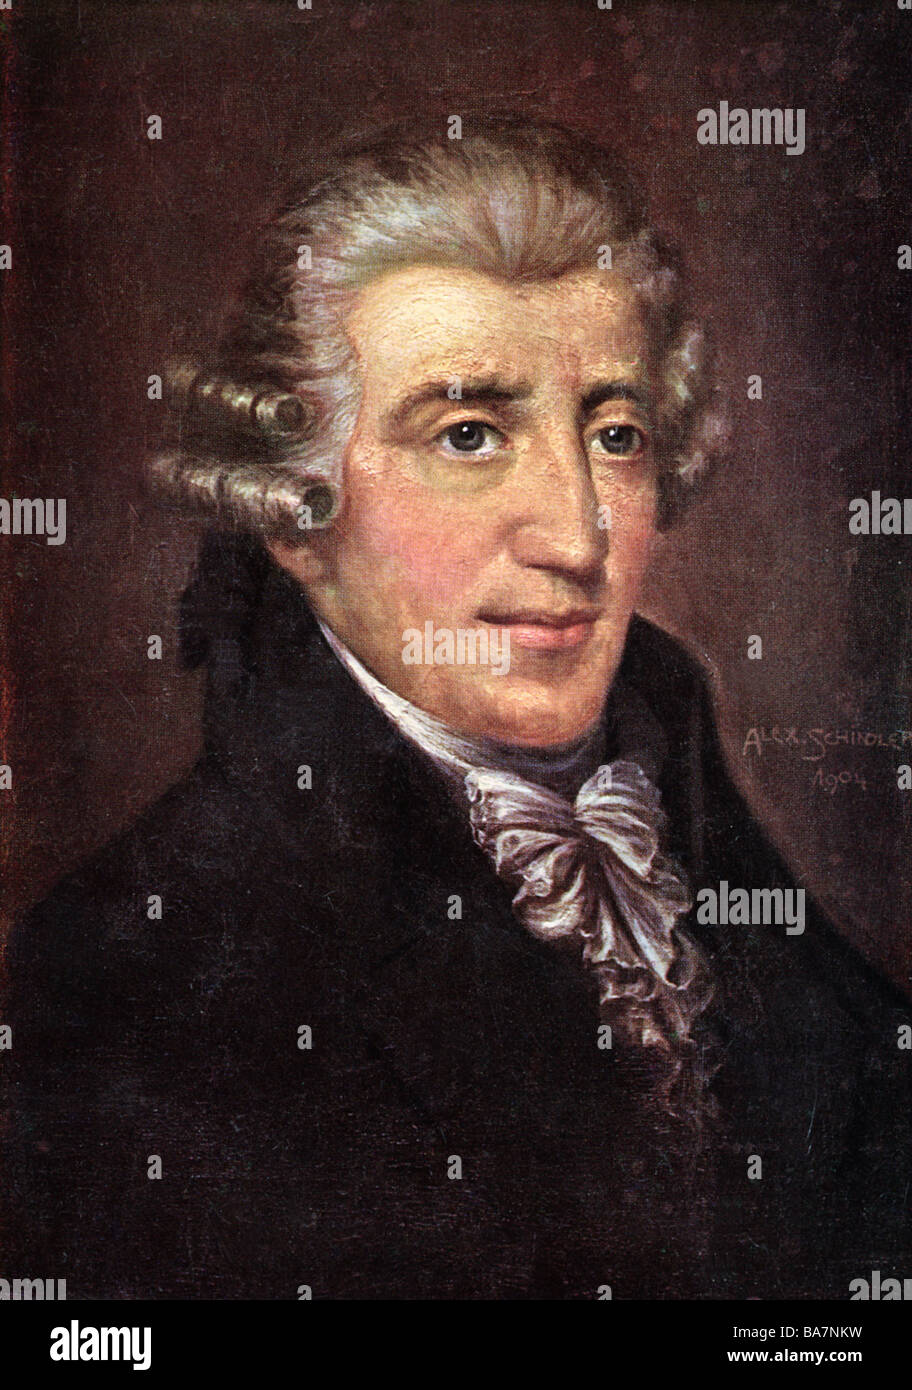 Haydn, Joseph, 31.3.1732 - 31.5.1809, Austrian musician (composer), portrait, painting by Albert Schindler, 18th century, Artist's Copyright has not to be cleared Stock Photo